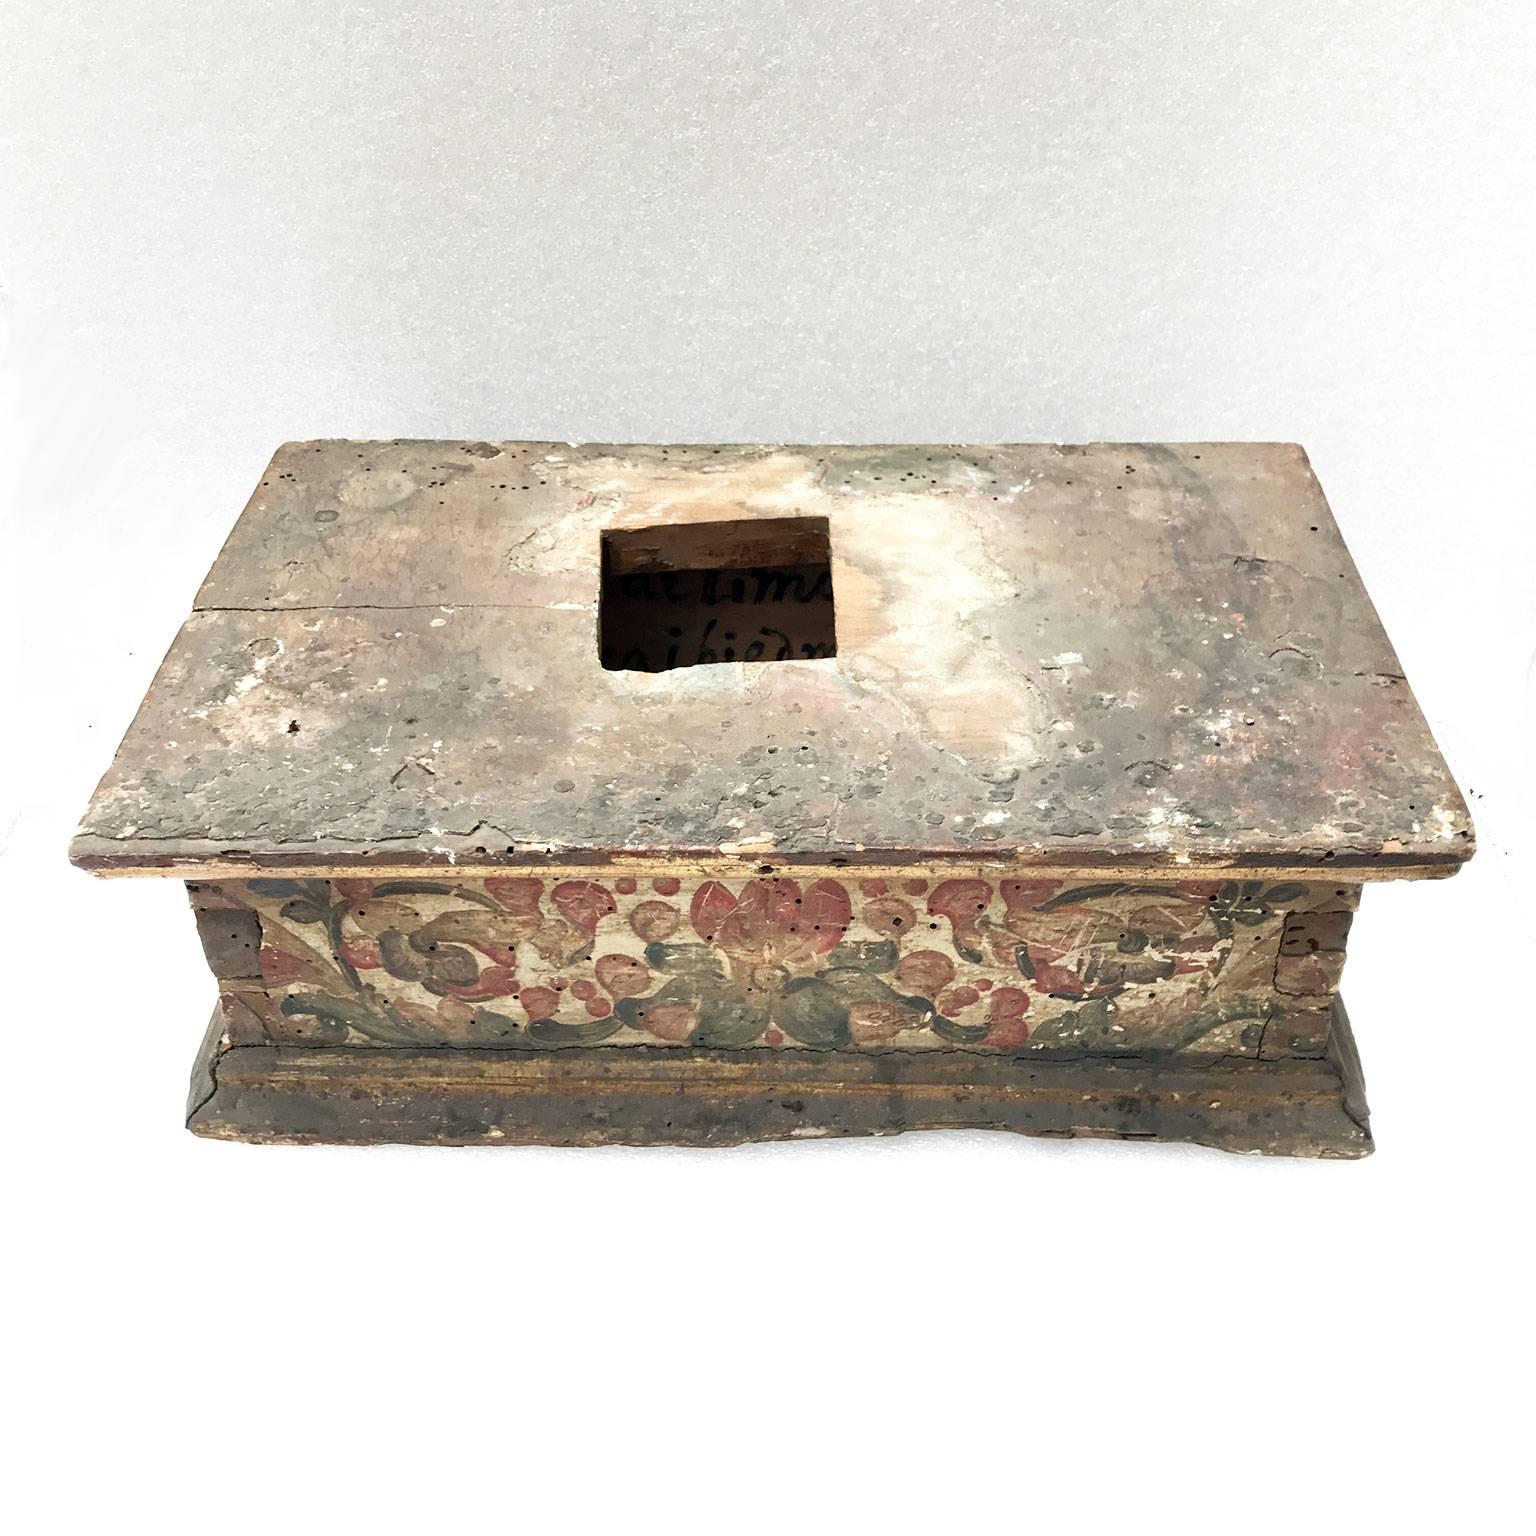 Hand-Carved 17th Century Italian Baroque Basement Painted and Gilt Wood Sculpture Stand 1661